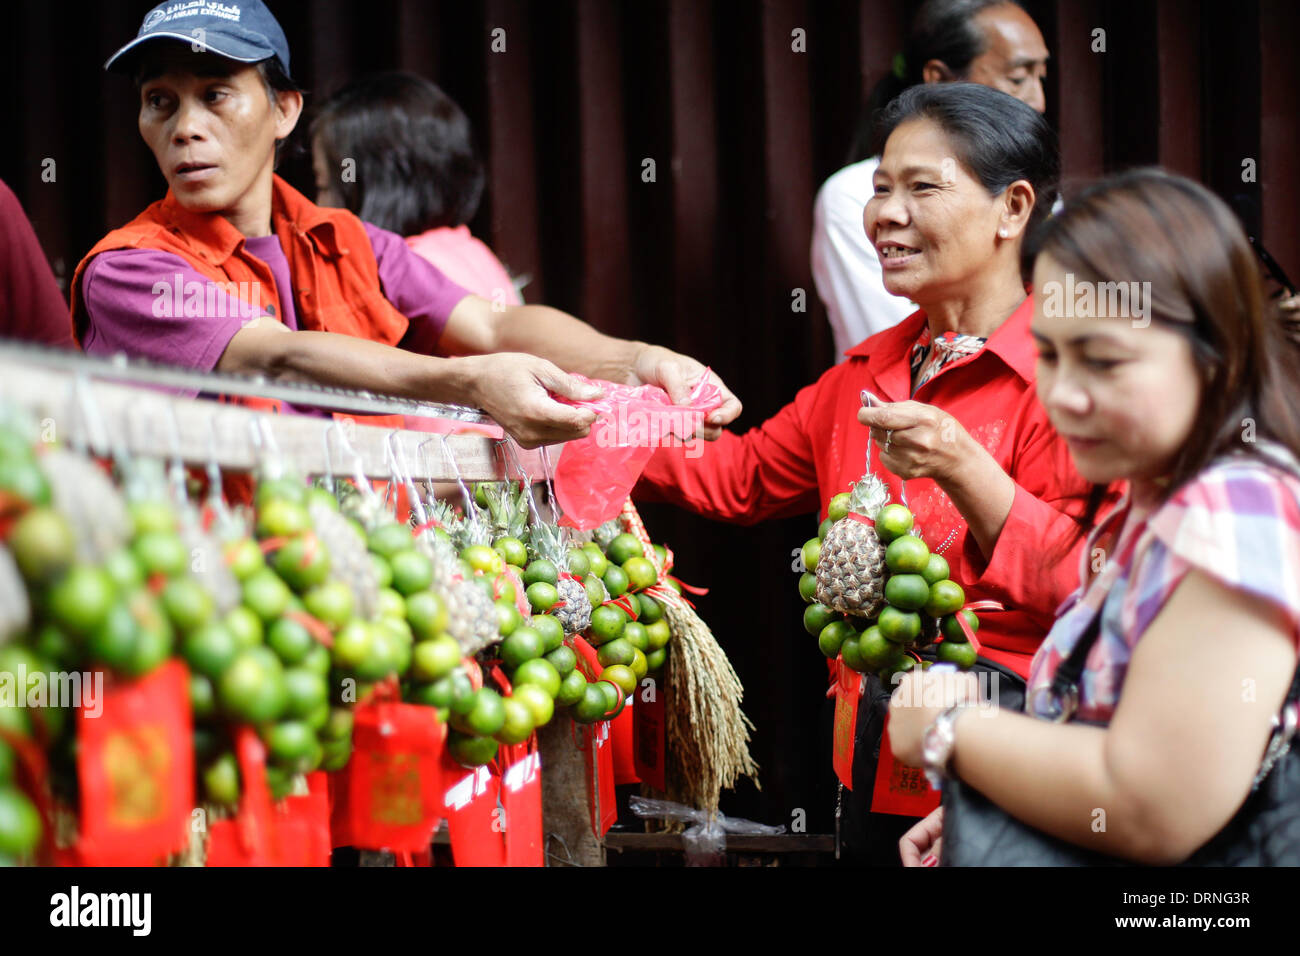 Manila, Phillipines. 30th January 2014. A woman purchases round fruits from a street vendor in Chinatown Manila on January 30, 2014. Lucky charms, fruits, street performers and firecrackers were seen around Chinatown in Manila, a day before the celebration of the Chinese New Year, the Year of the Horse. Photo by Mark Cristino/Alamy Live News Stock Photo